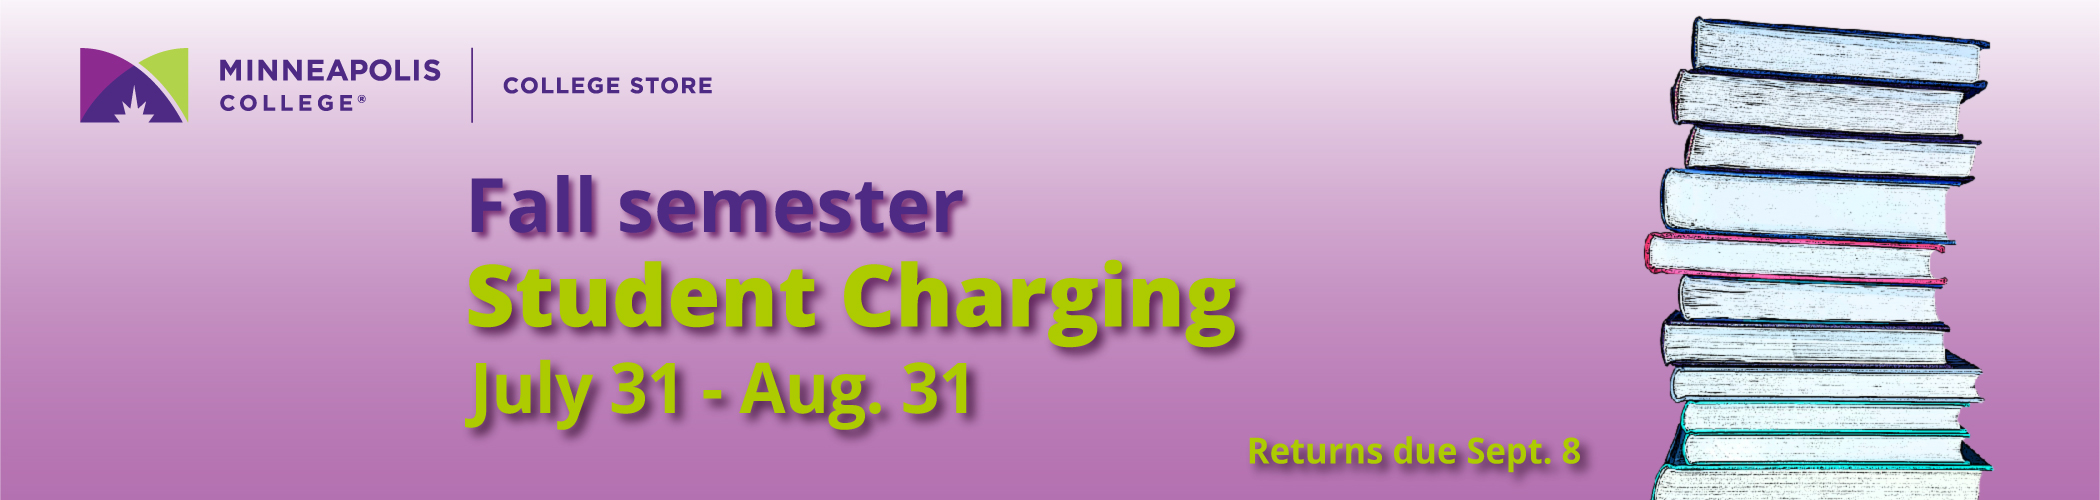 summer semester student charging available through June 9